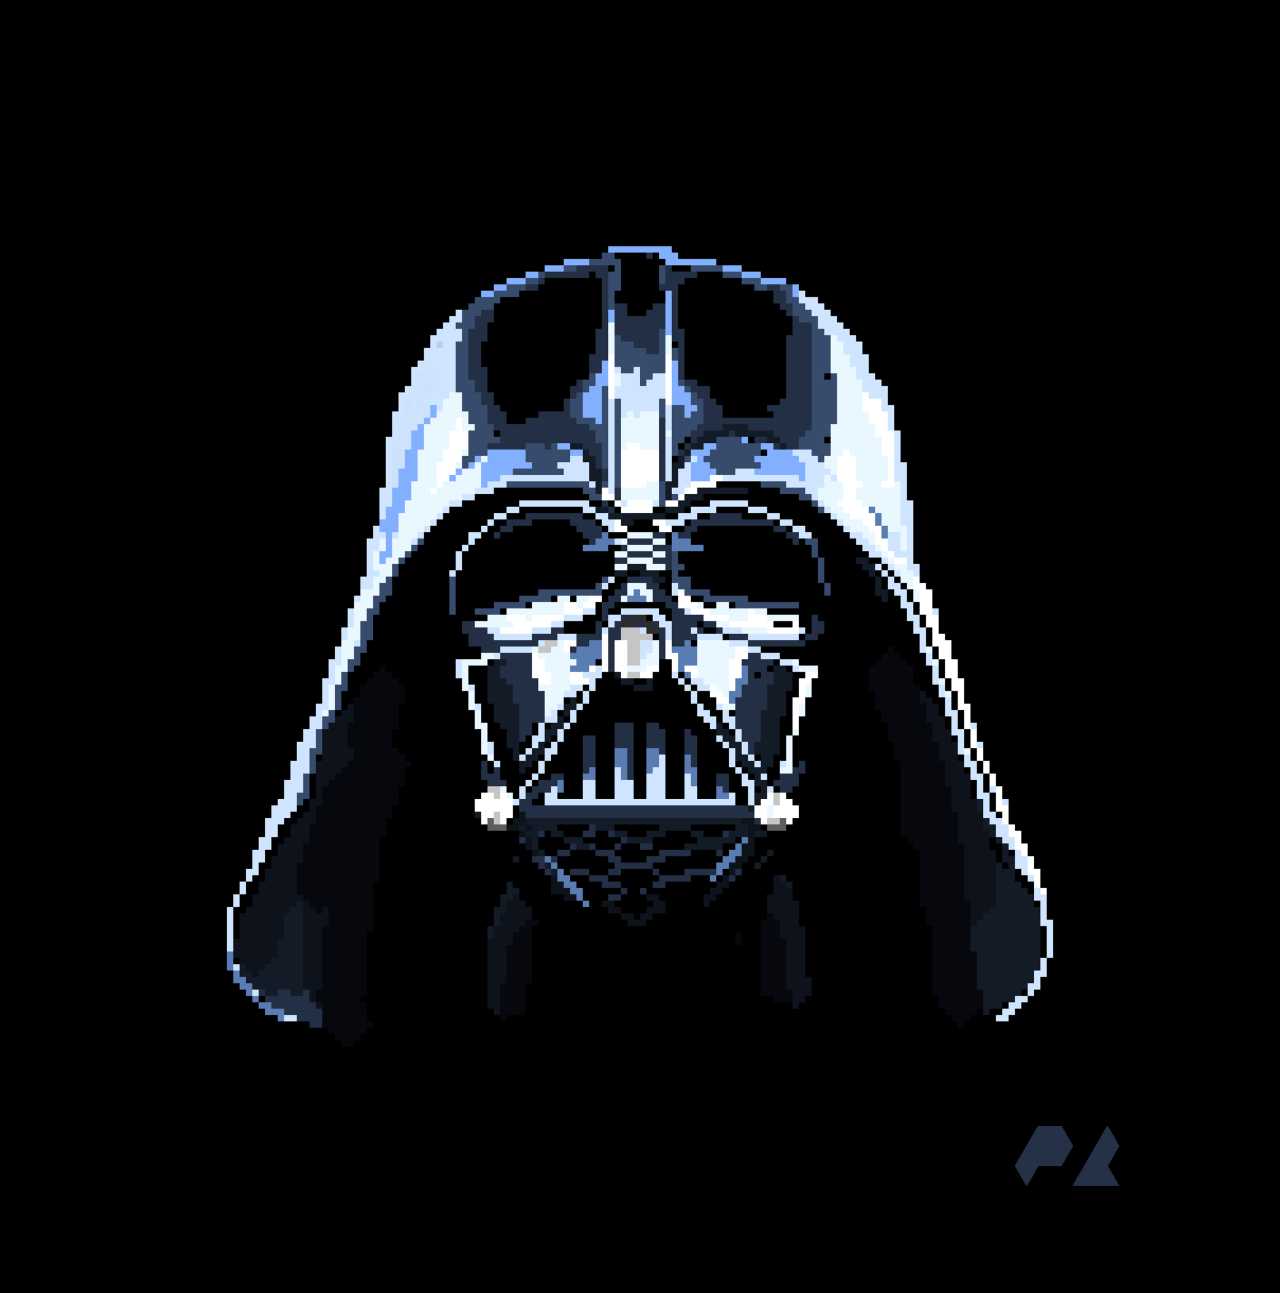 Phuoc Le My Darth Vader Pixel Art Just So Psyched About